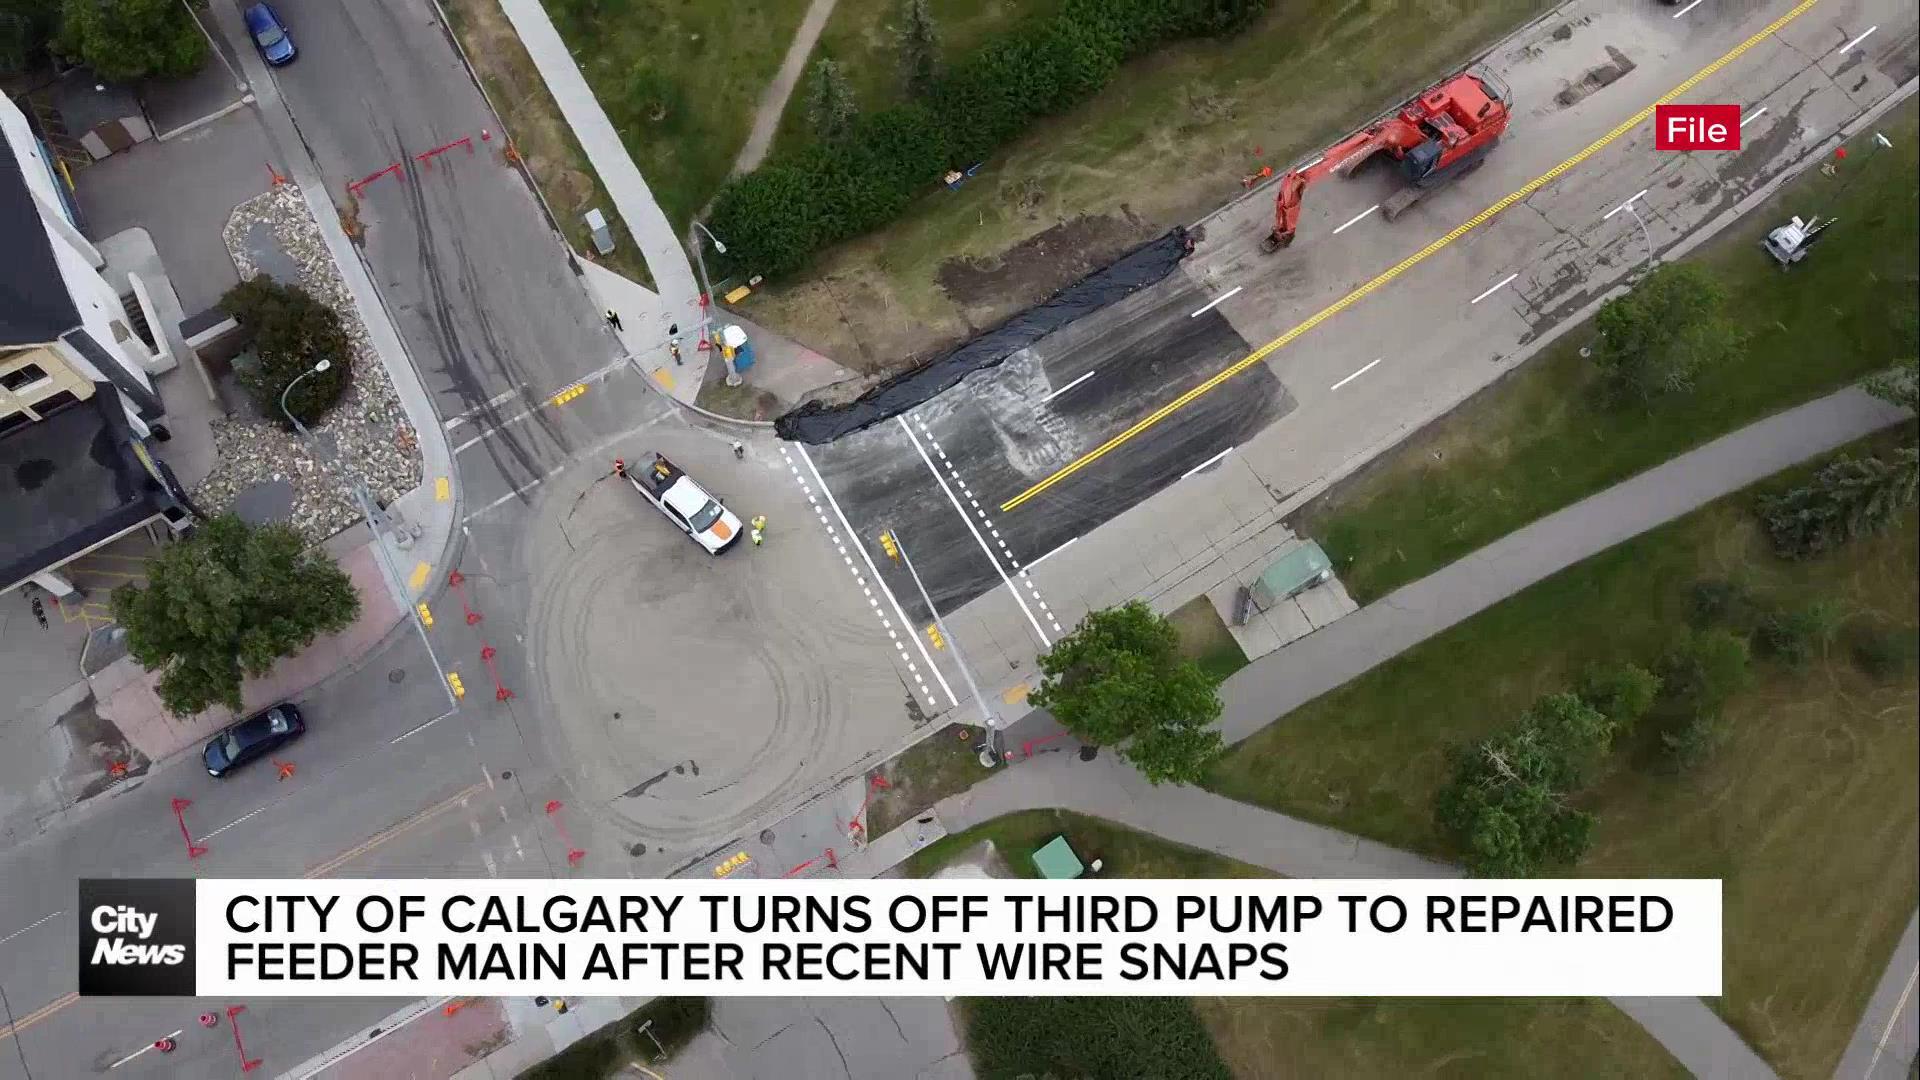 City of Calgary turns off one pump to repaired feeder main